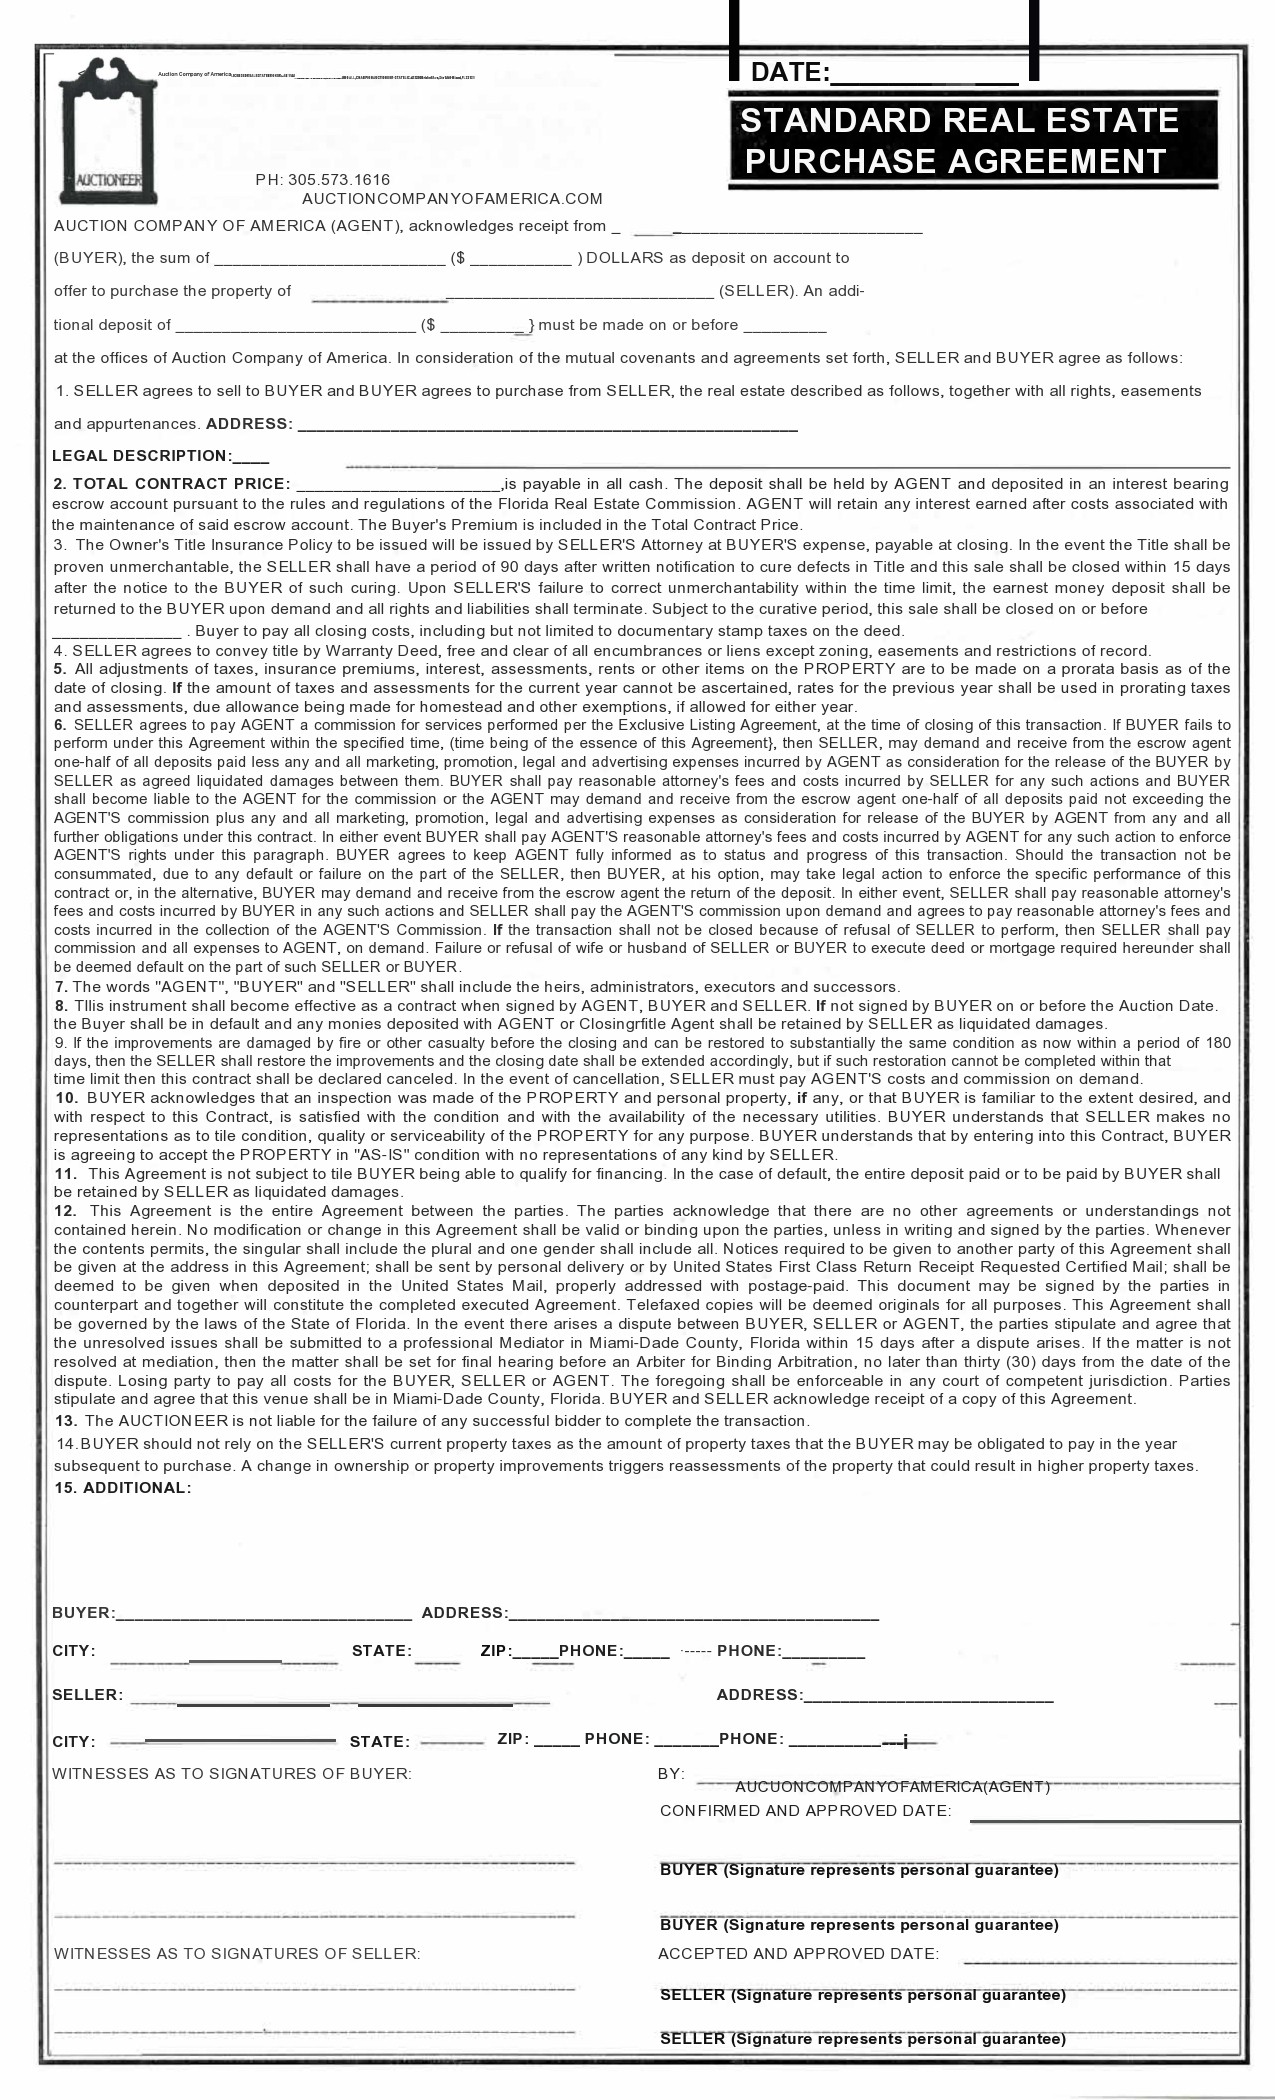 Free real estate purchase agreement 26